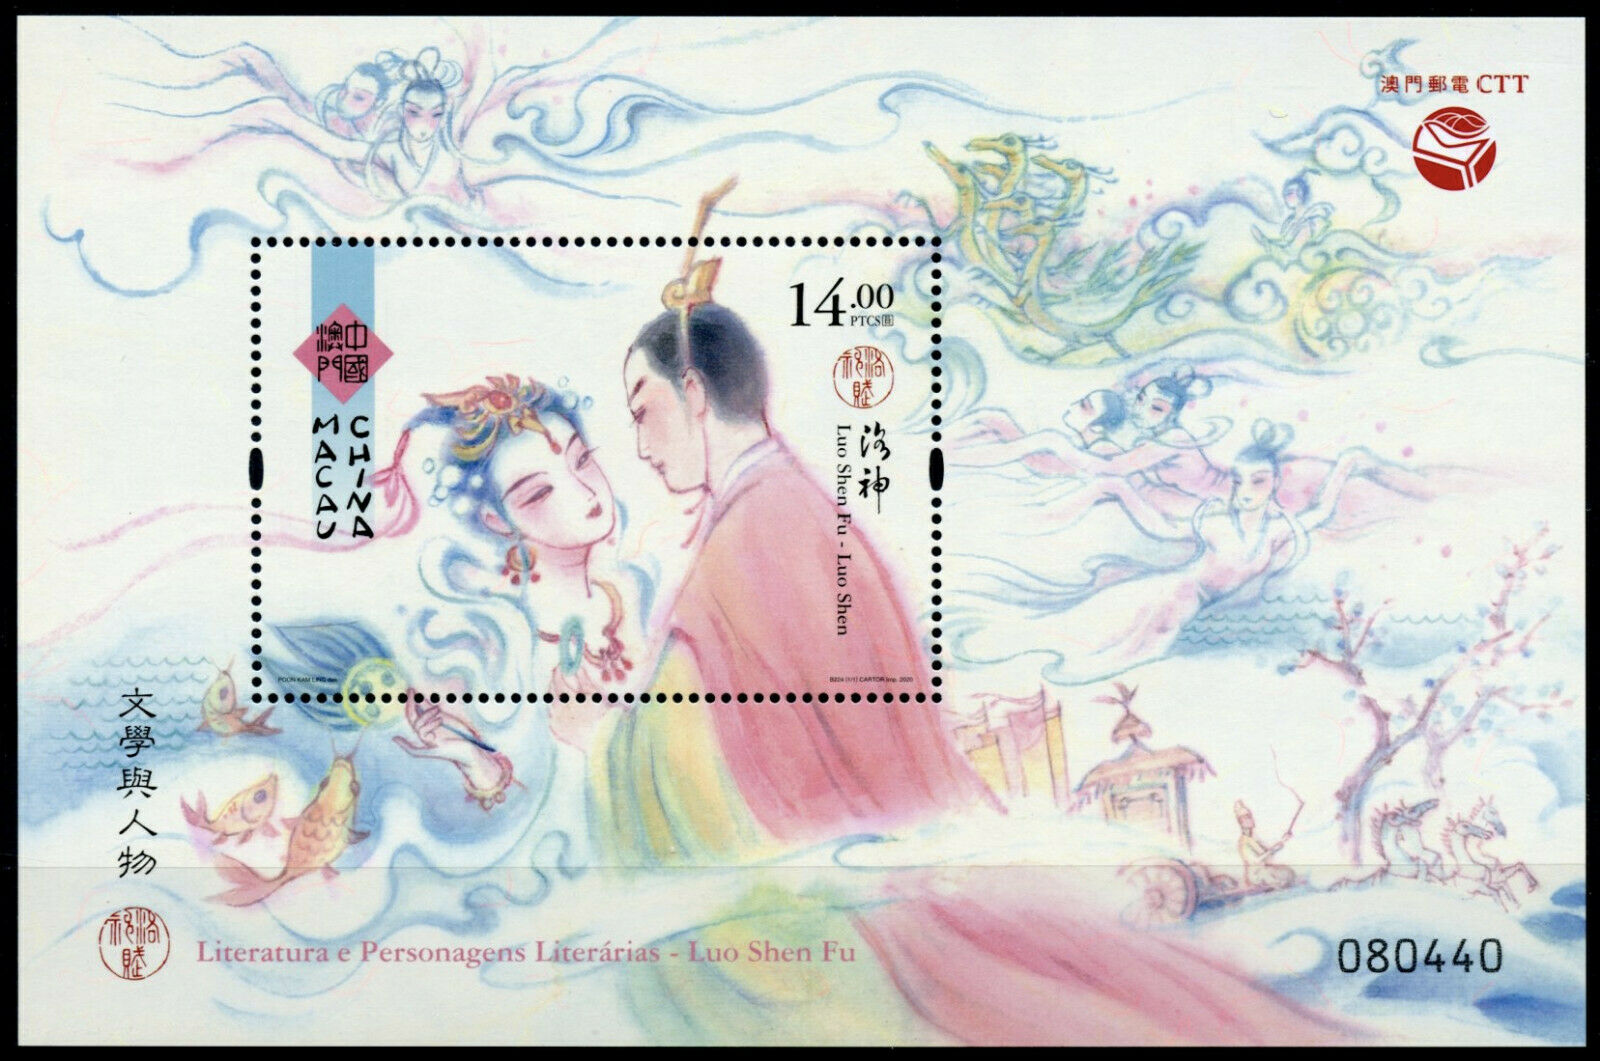 Macau Macao Cultures Stamps 2020 MNH Literature Characters Luo Shen Fu 1v M/S